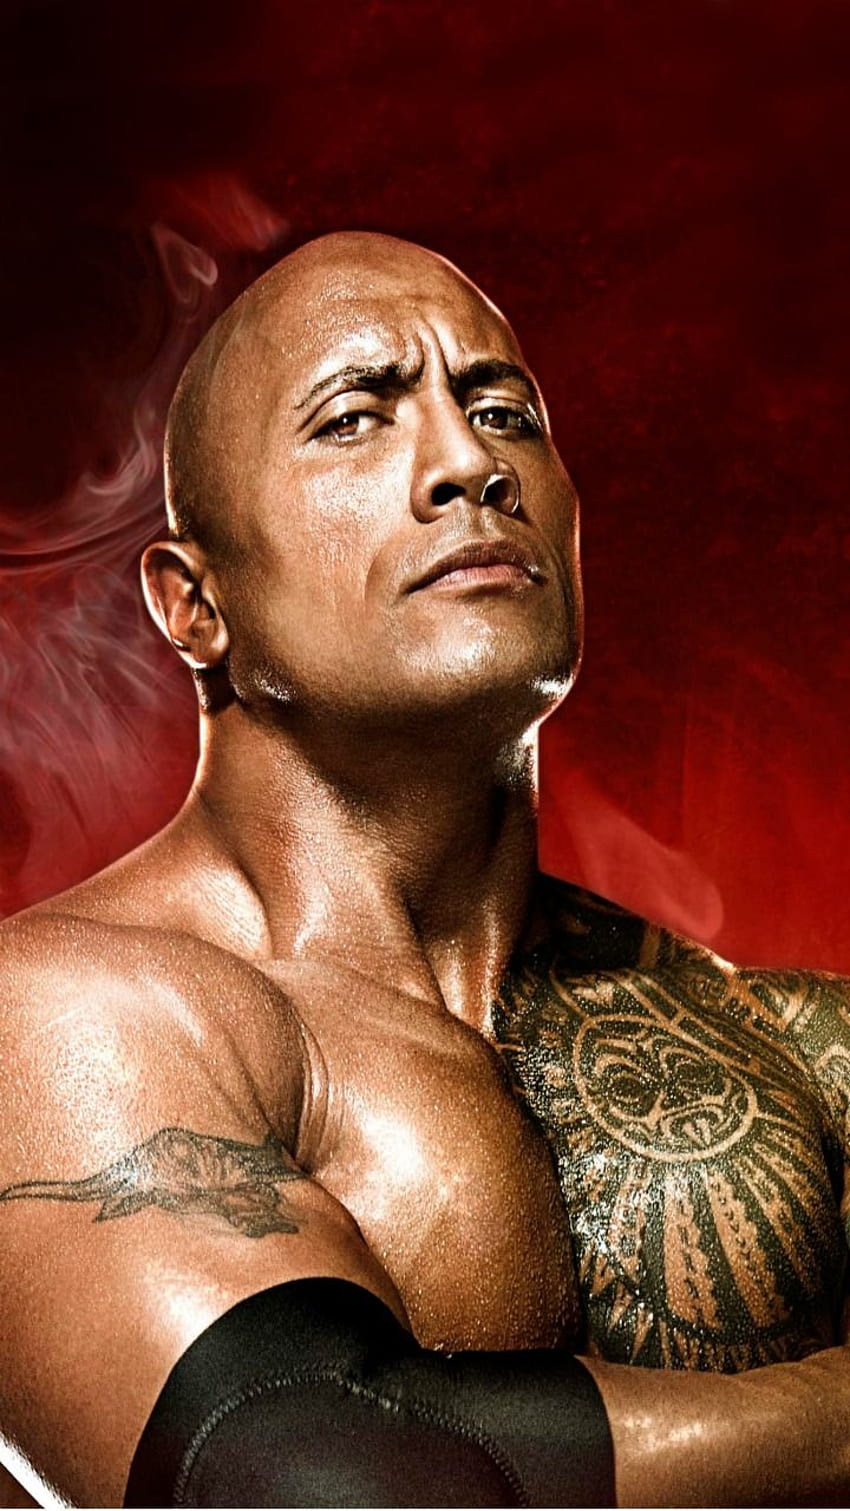 Dwayne Johnson Tattoos  Full Guide and Meanings2019